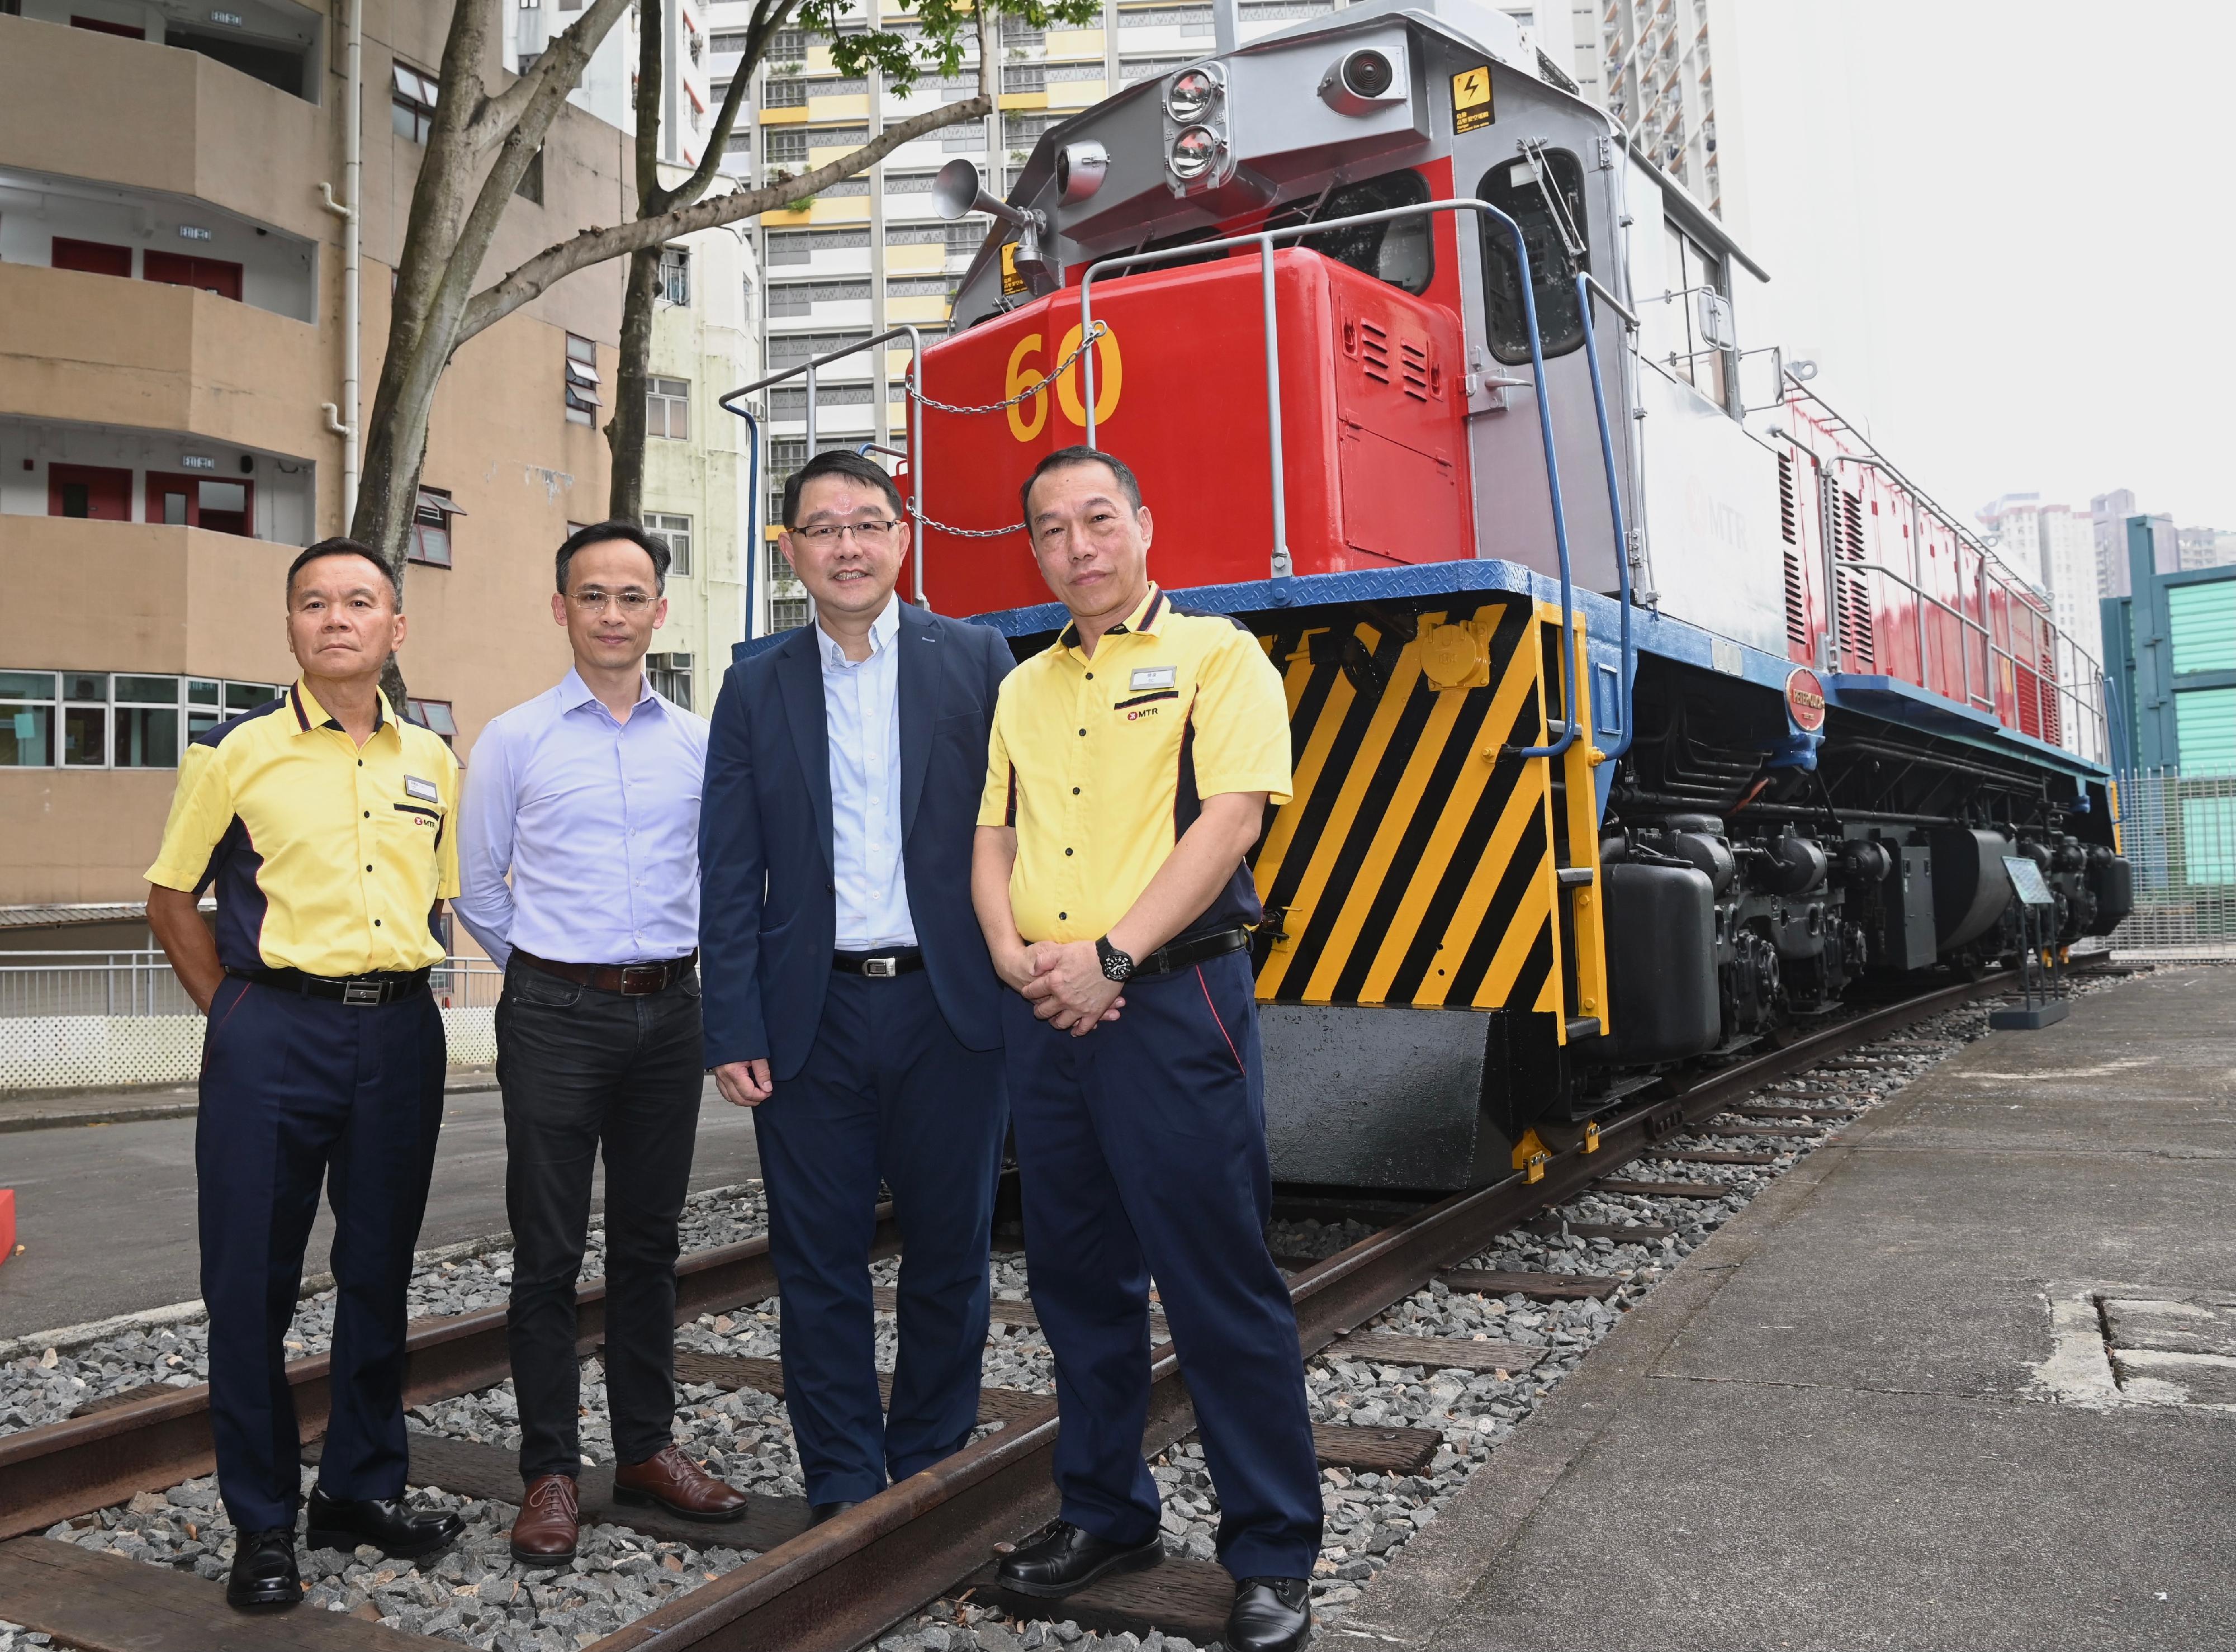 Diesel Electric Engine No. 60 - "Peter Quick" (L60) will be put on display at the Hong Kong Railway Museum starting from tomorrow (October 4). Photo shows the Museum Director of the Hong Kong Heritage Museum, Mr Brian Lam (second right), the Curator (3D Objects) of the Conservation Office, Mr Jonathan Tse (second left), and two former drivers of L60, Mr Ko Tak-tim (first left), and Mr Cheung Shun-chuen (first right), with L60.